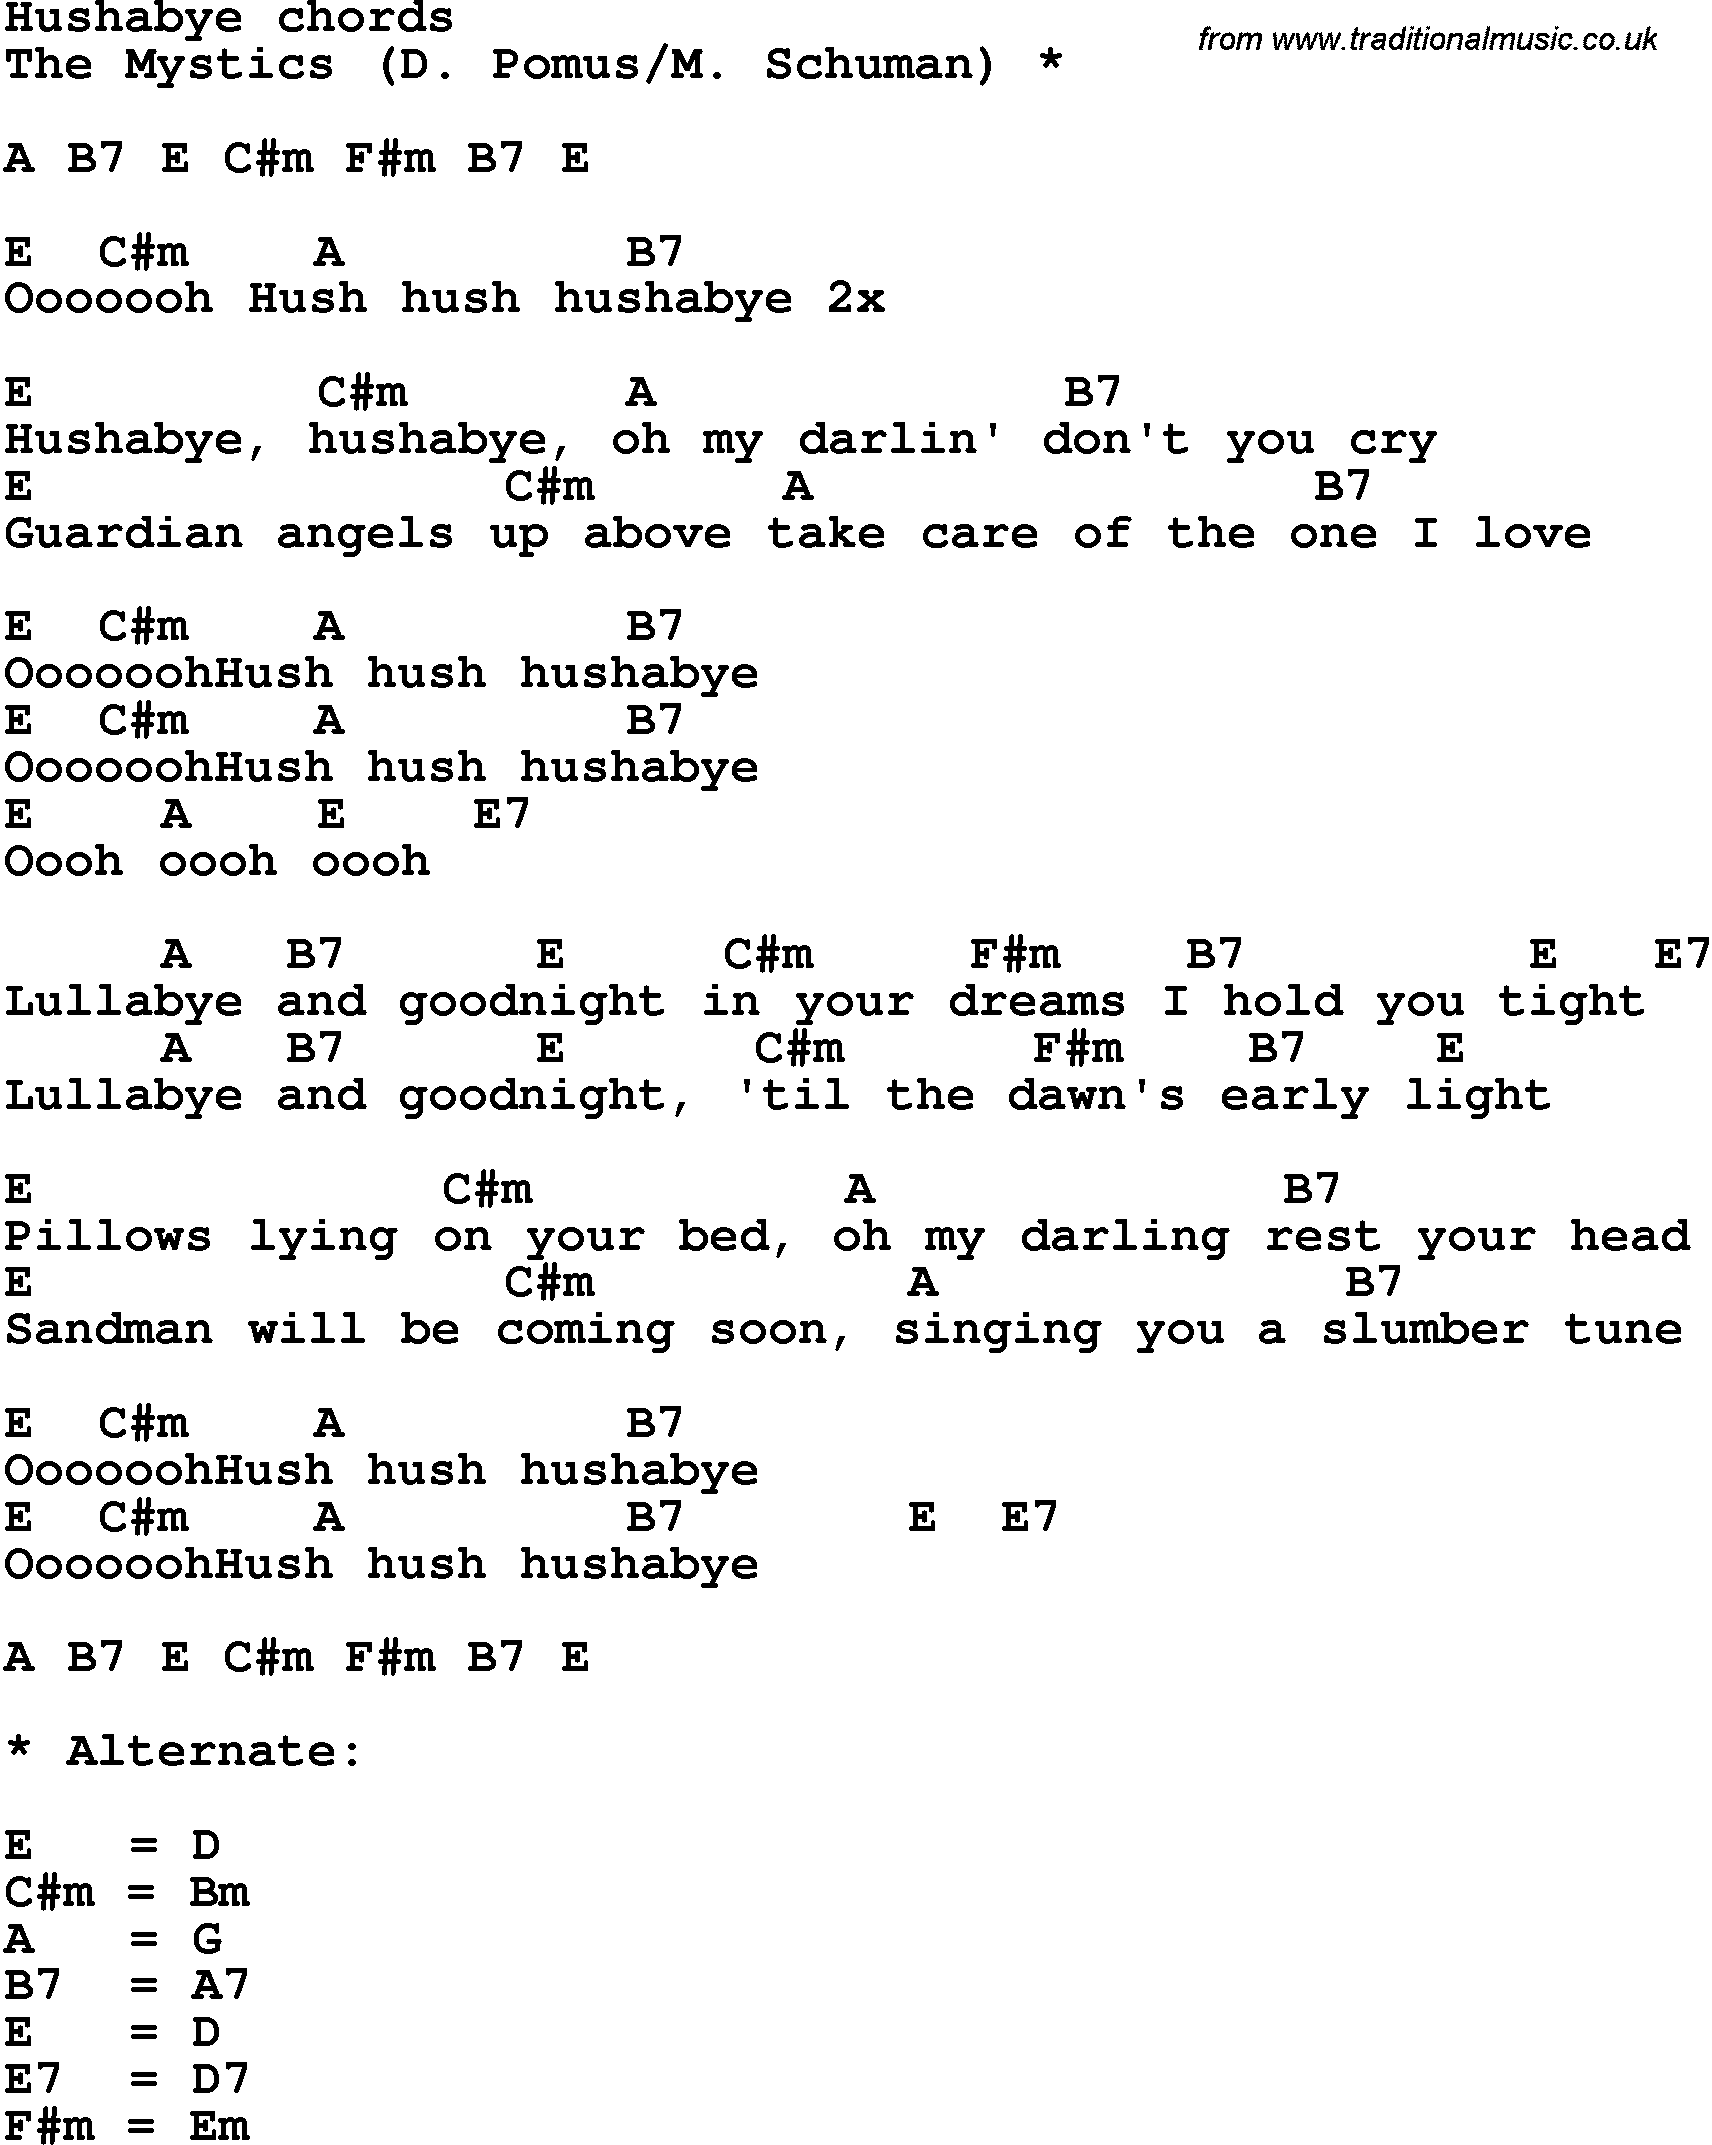 Song Lyrics with guitar chords for Hush A Bye